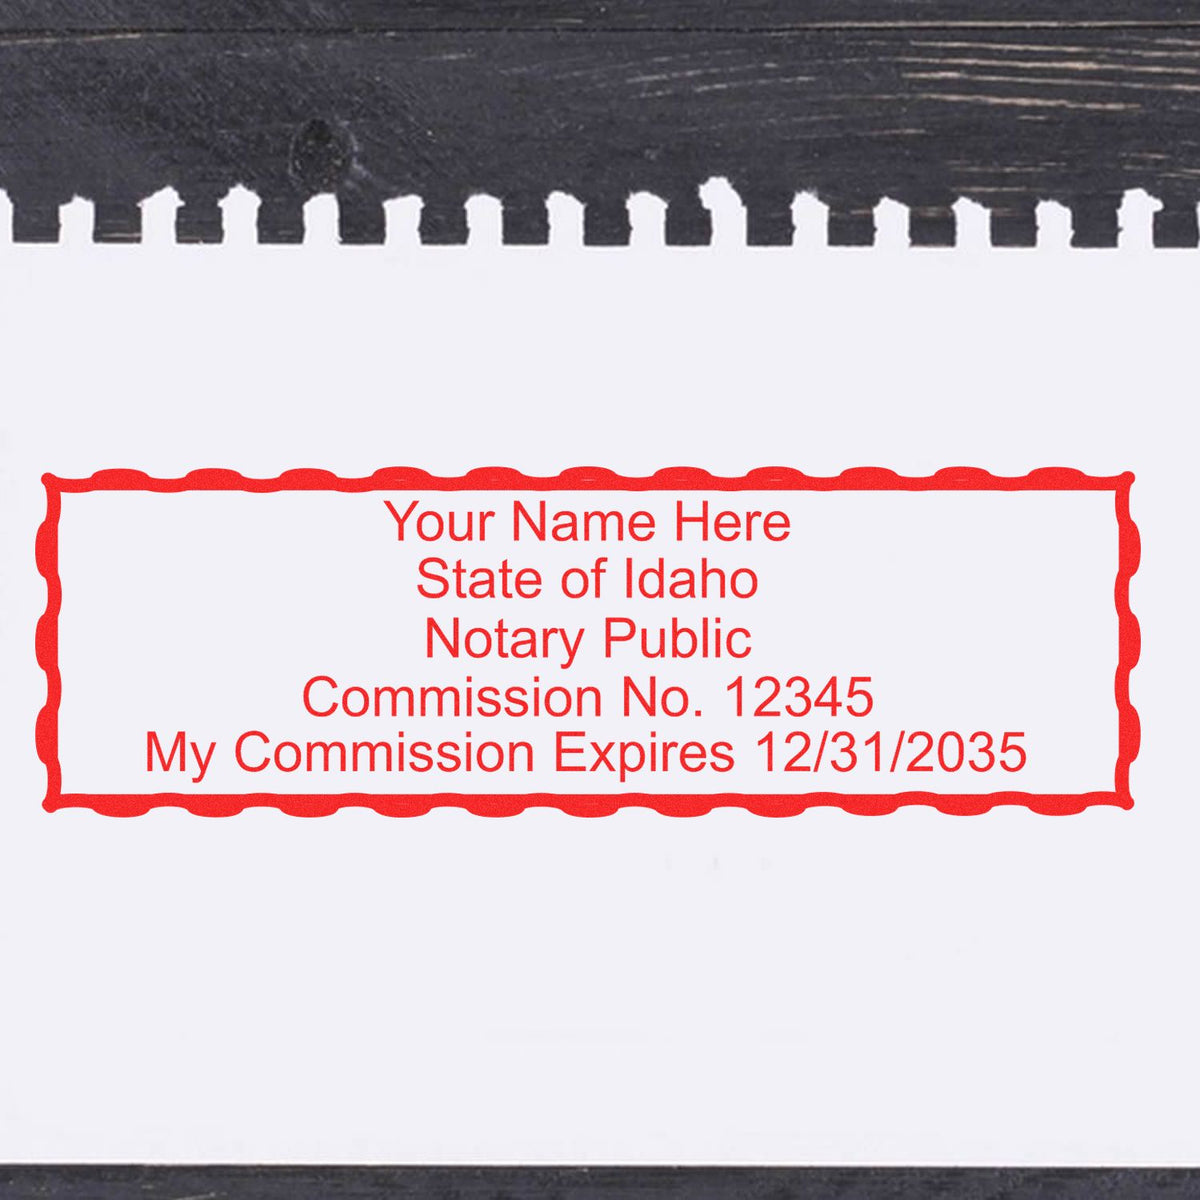 The Heavy-Duty Idaho Rectangular Notary Stamp stamp impression comes to life with a crisp, detailed photo on paper - showcasing true professional quality.